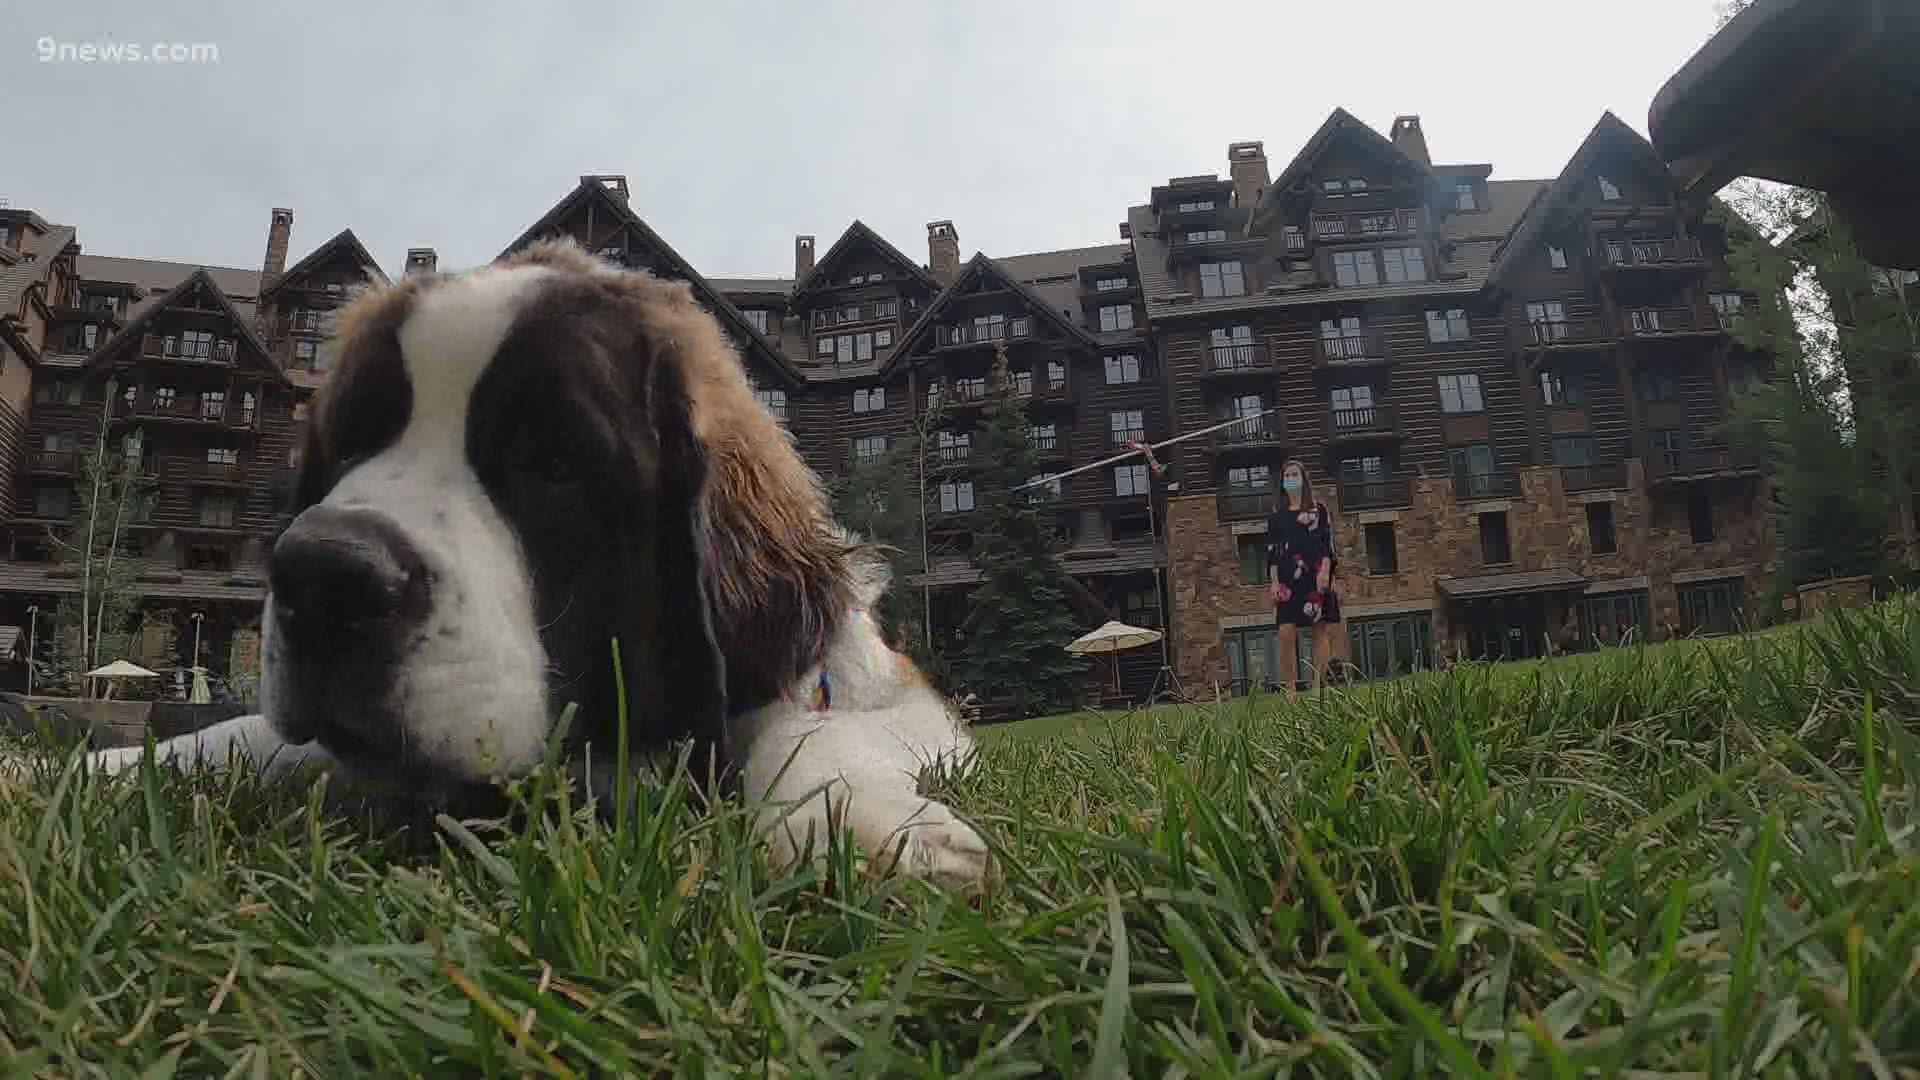 A new employee at The Ritz-Carlton Bachelor Gulch is working for treats and belly rubs.